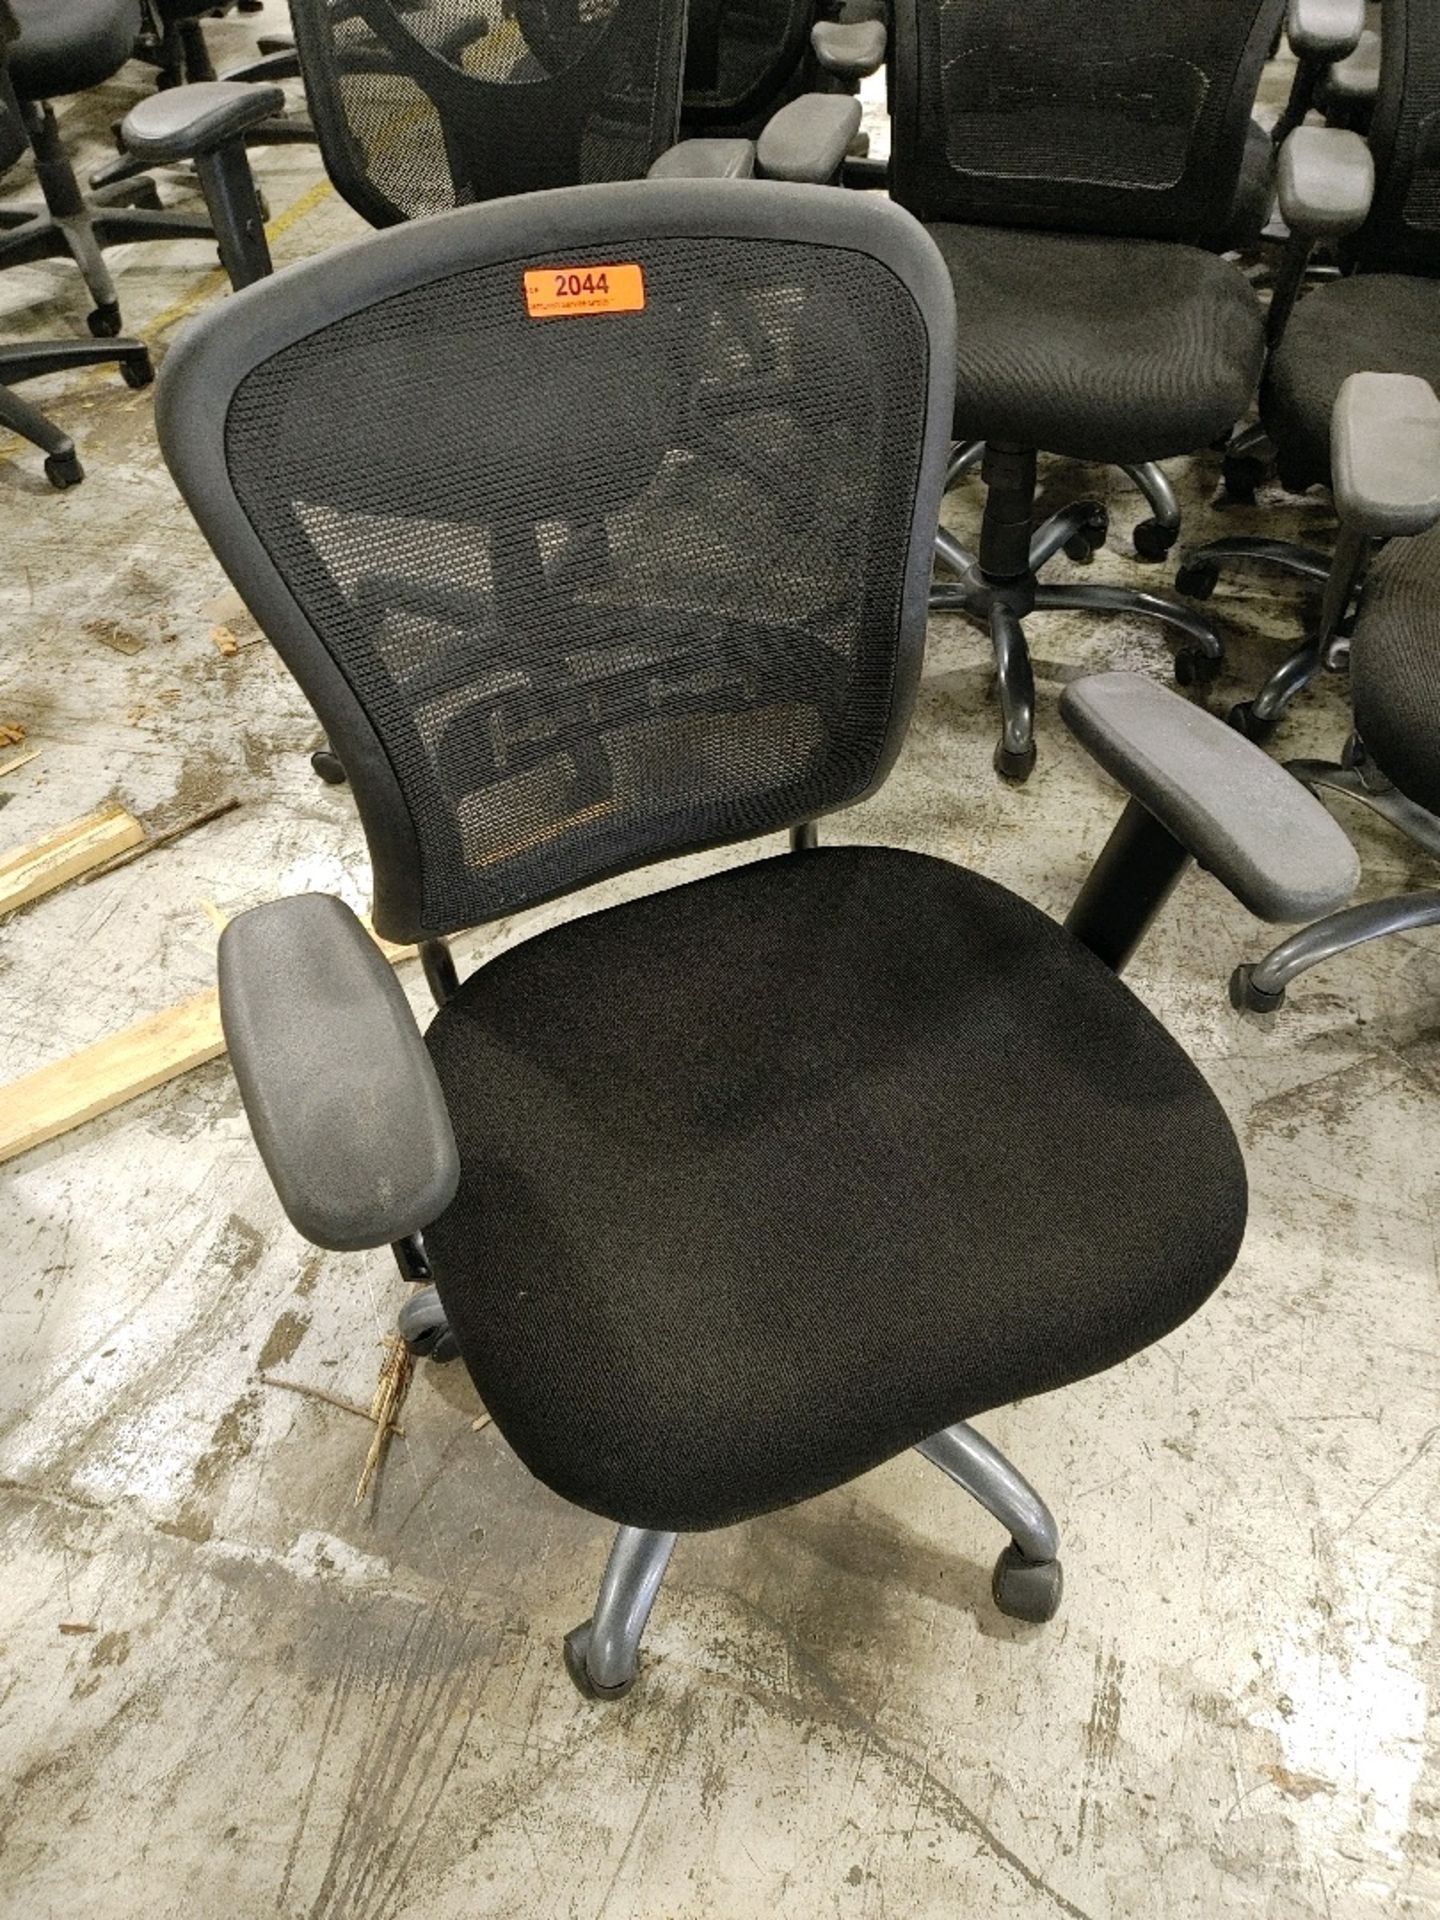 OFFICE ARM-CHAIRS ON WHEELS QTY: 12, LOCATED: 6101 N. 64TH STREET MILWAUKEE, WI 53218